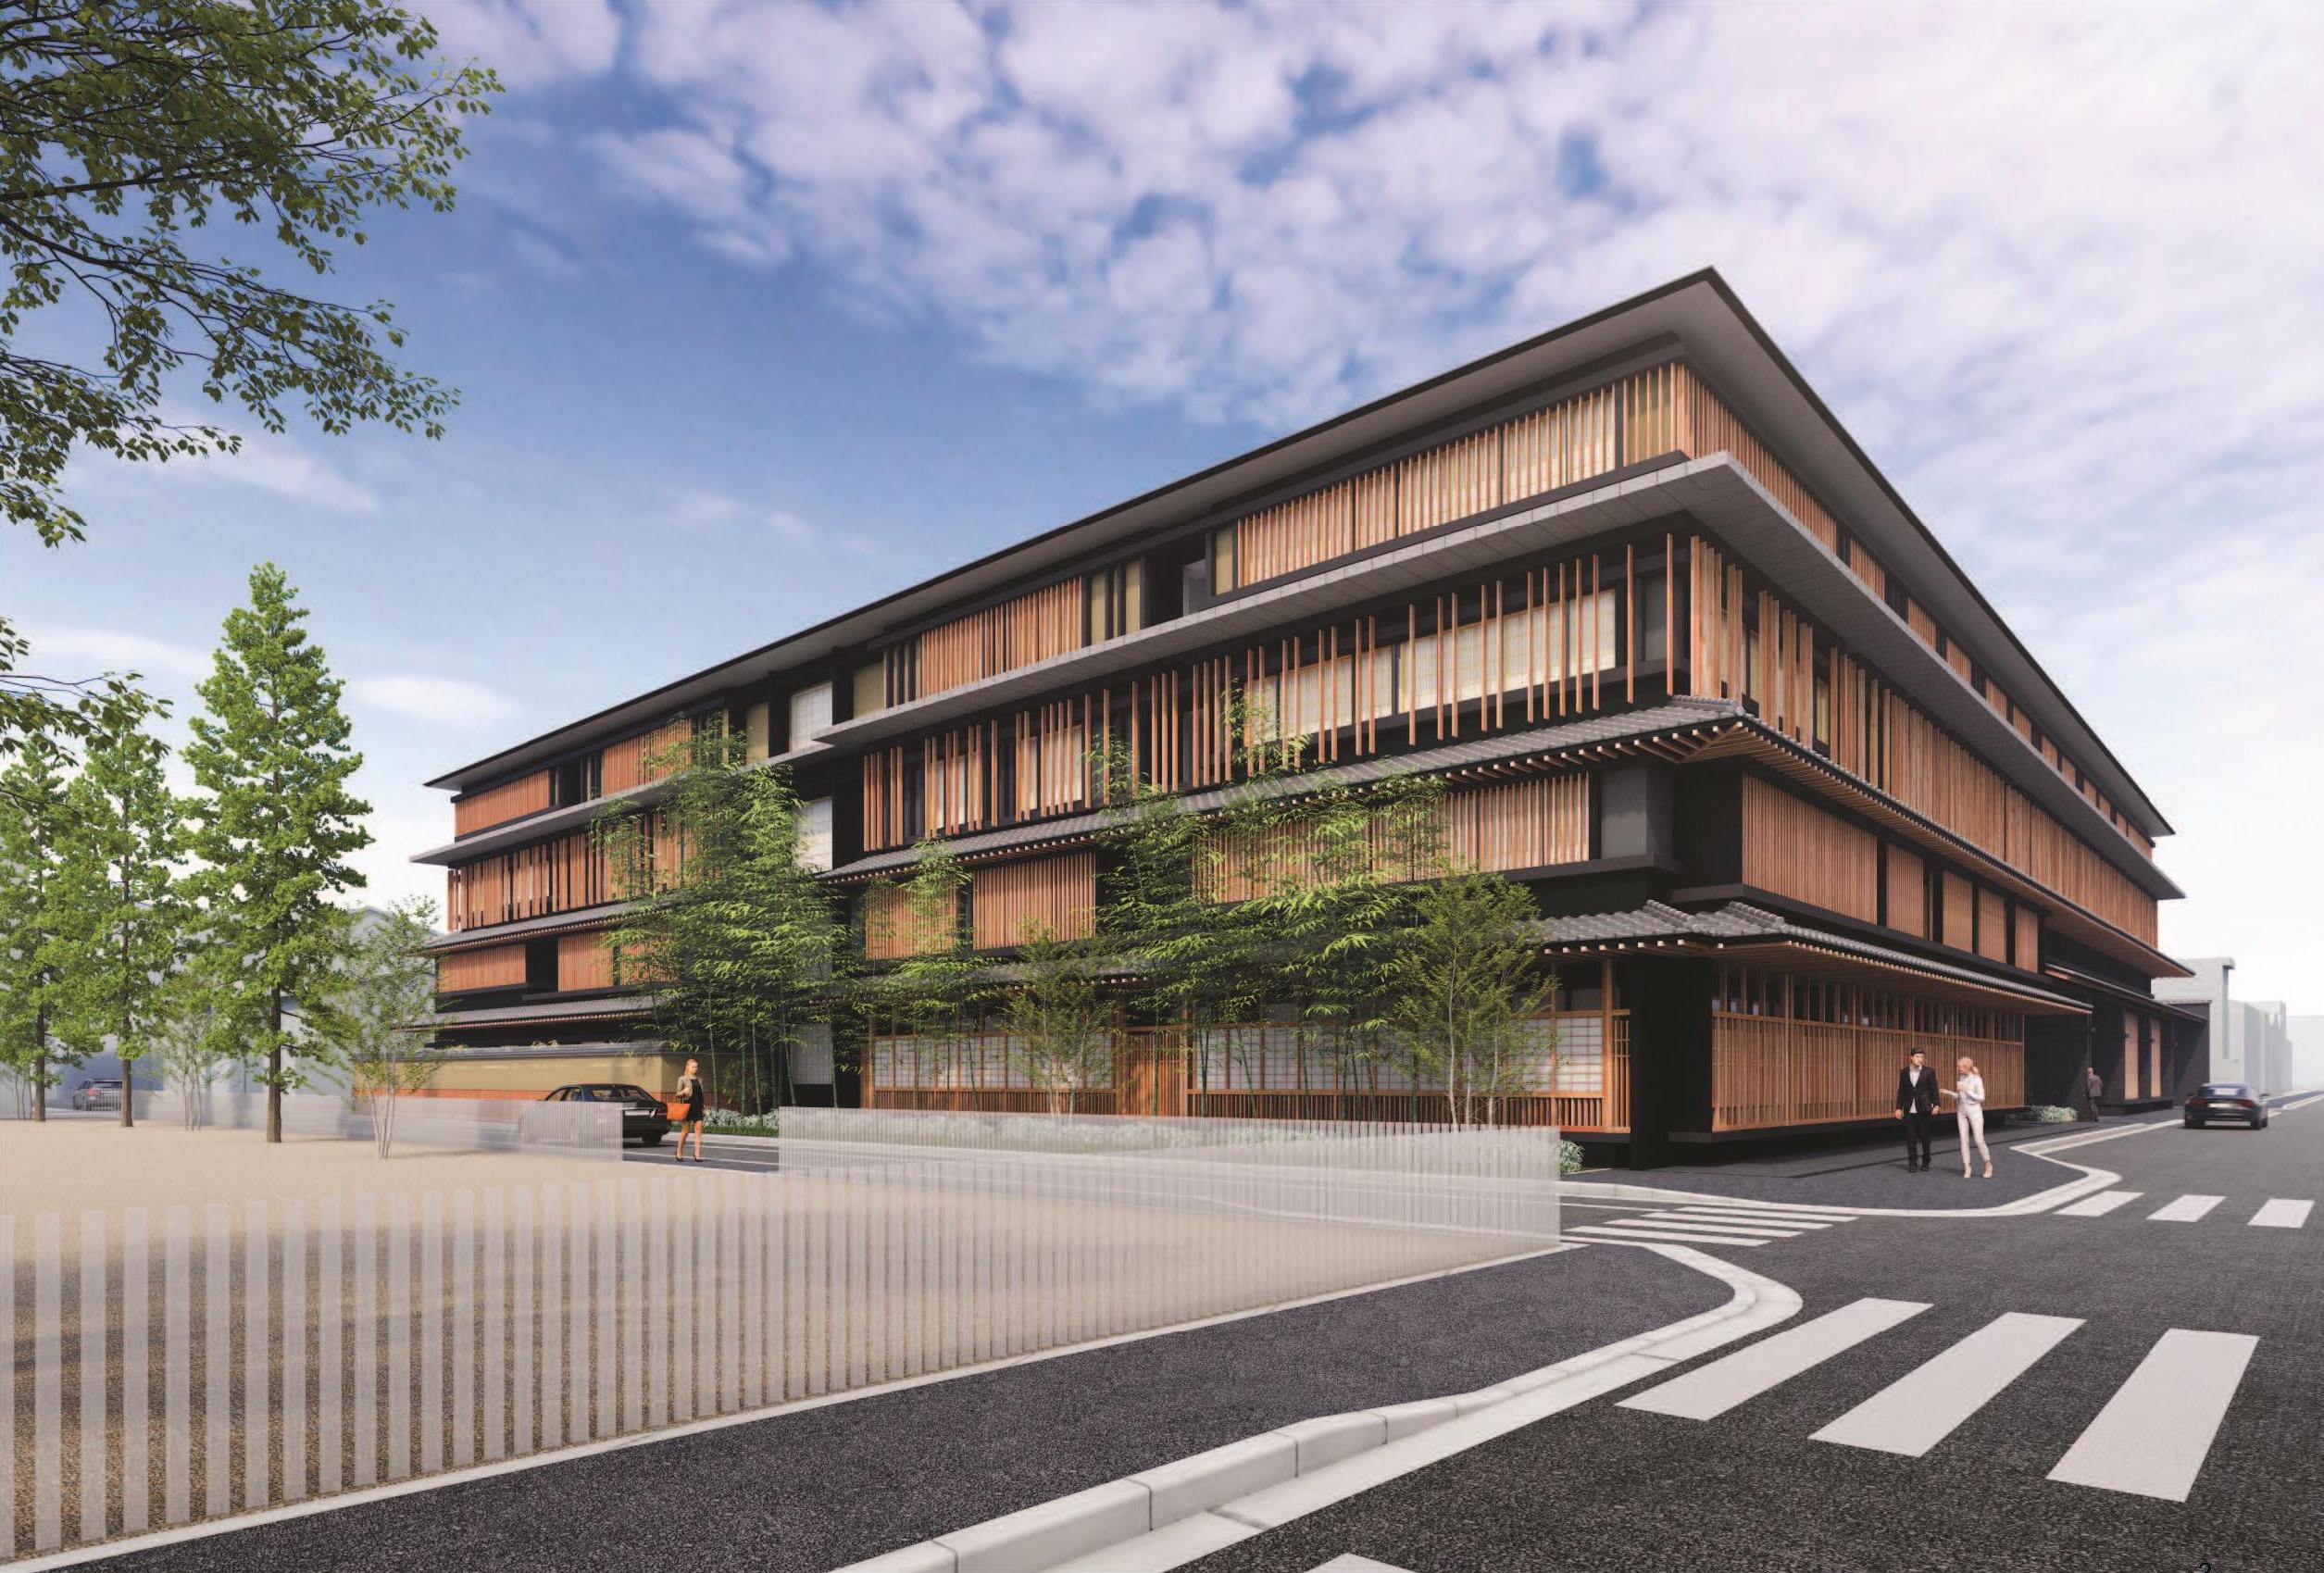 Dusit continues expansion in Japan with new luxury hotel, Dusit Thani Kyoto